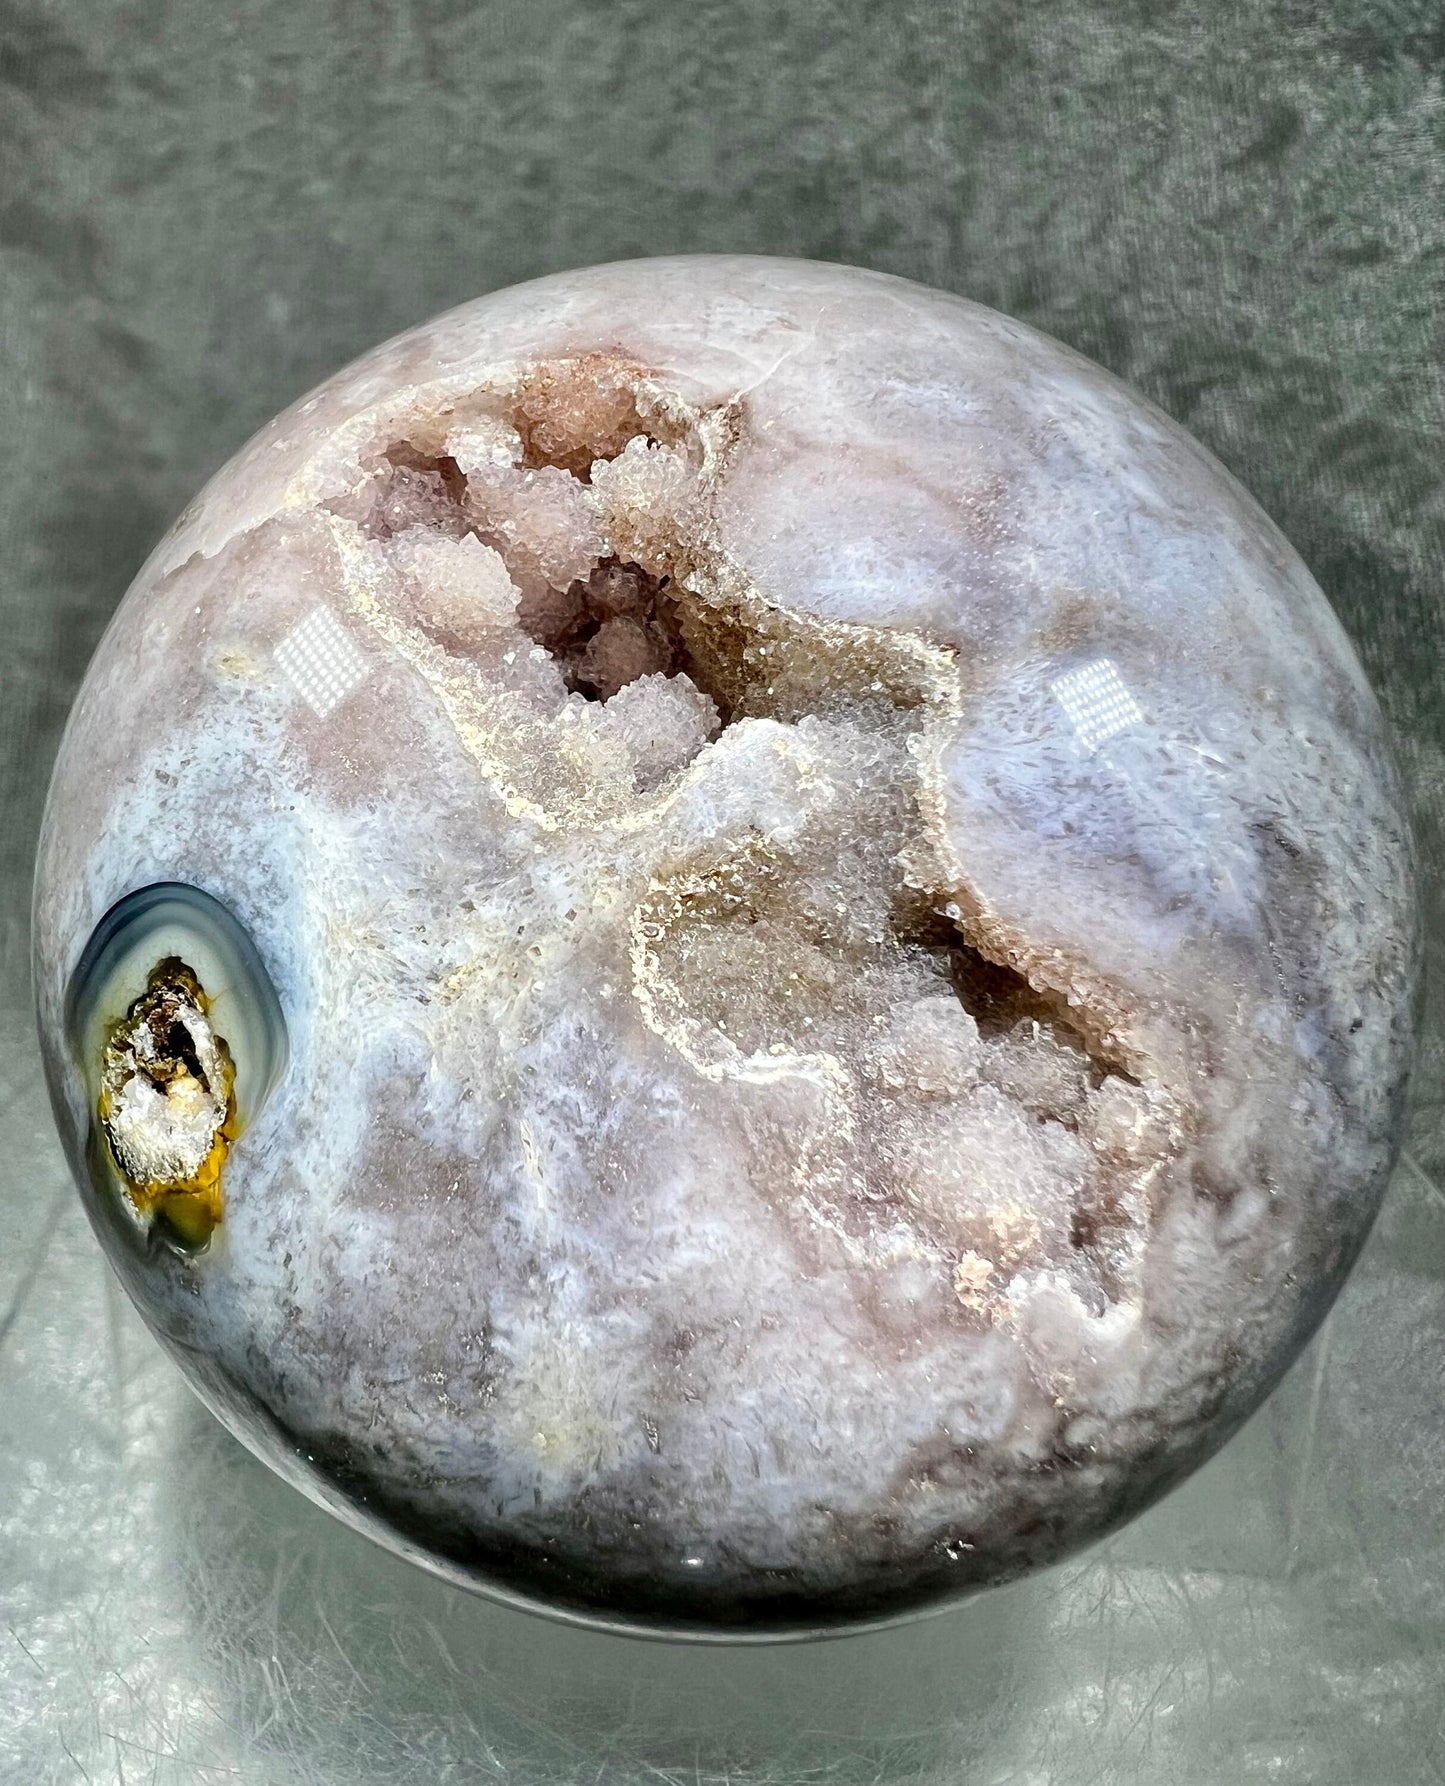 Amazing Sugar Druzy Pink Amethyst Sphere. 76mm. Stunning Shades Of Pink And Purple. High Quality Beautiful Crystal Sphere.